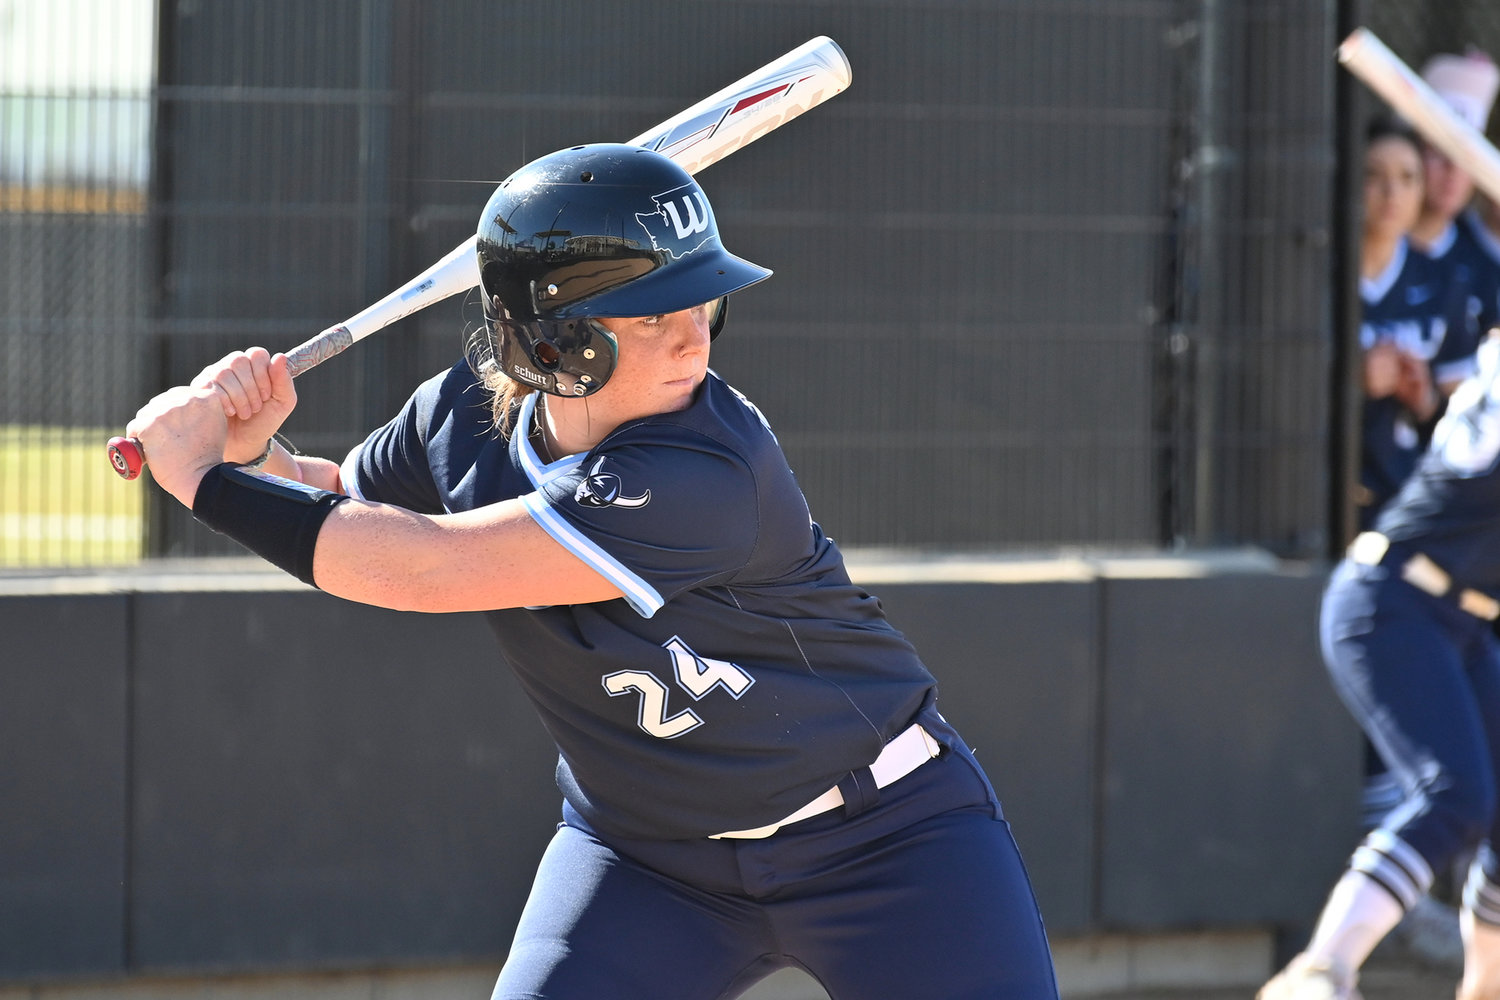 Pe Ell alumna Dakota Brooks put on a formidable first season with Western Washington University this spring, finishing top-10 in the conference in six different hitting categories.